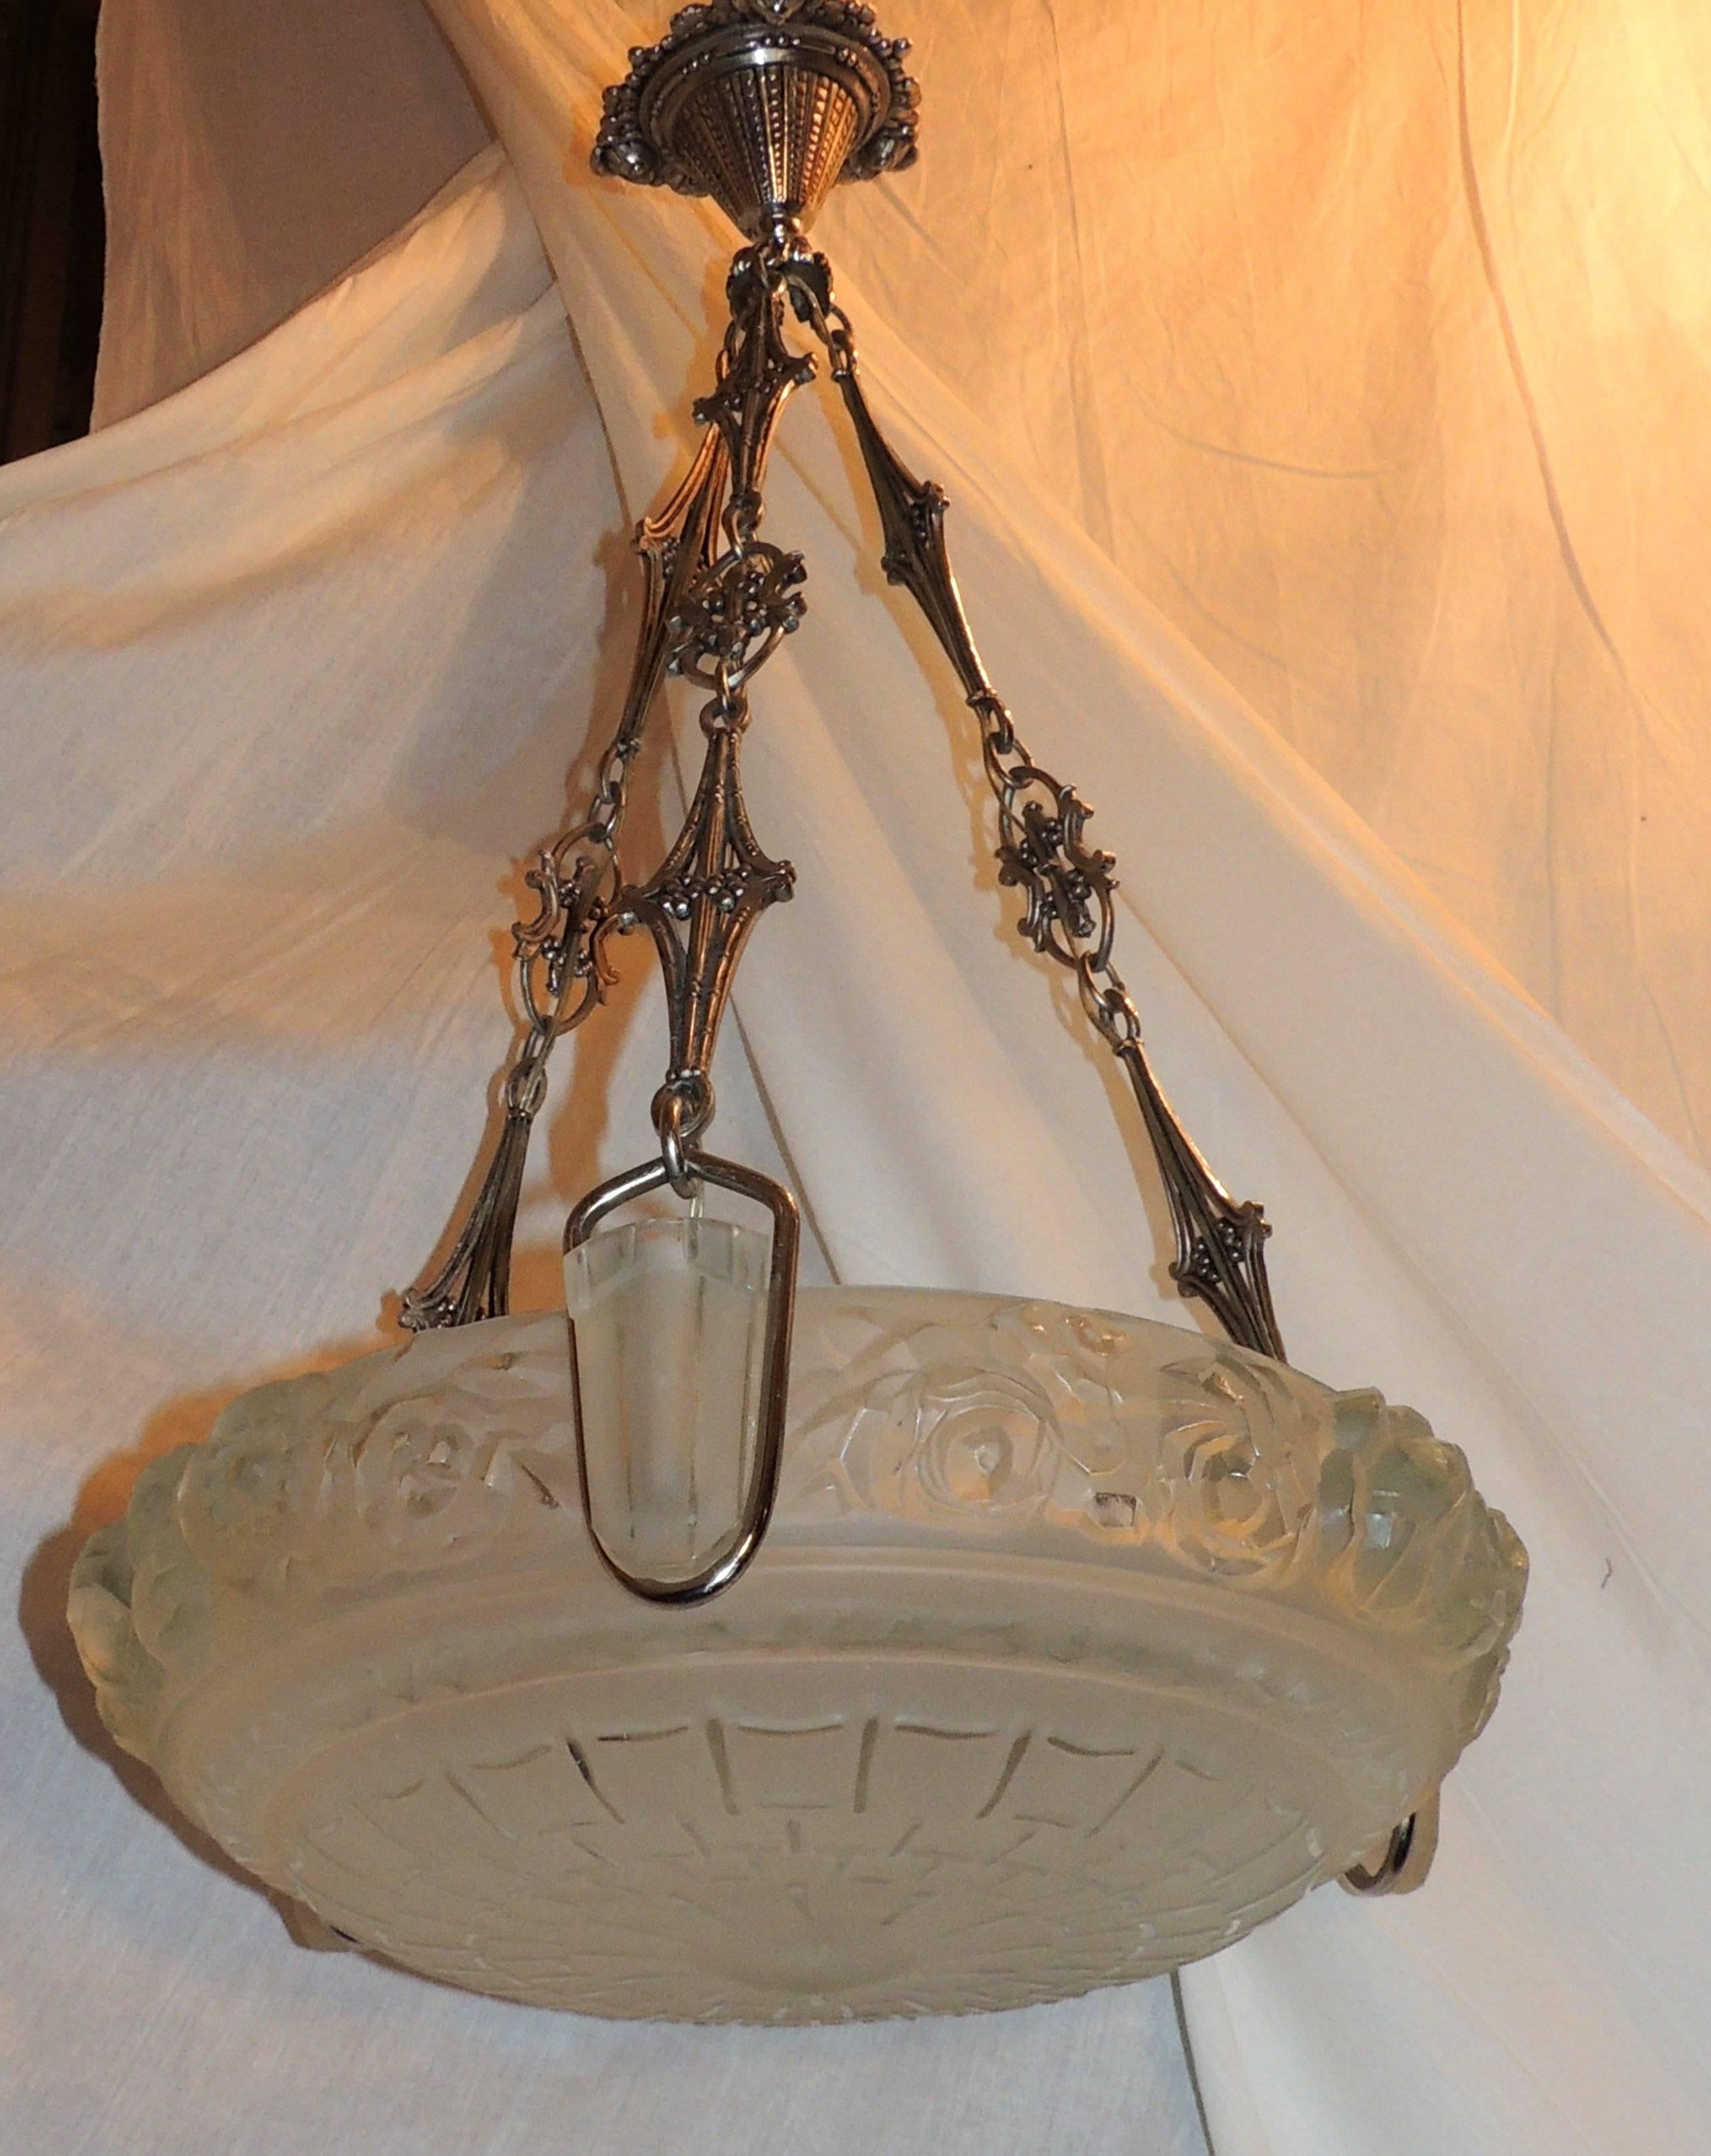 A wonderful French Art Deco signed chandelier by Sabino with floral frosted opalescent art glass and ornate canopy and chain. The height is adjustable to what ever length you need. Fitted with three lights on the inside, maximum wattage per socket